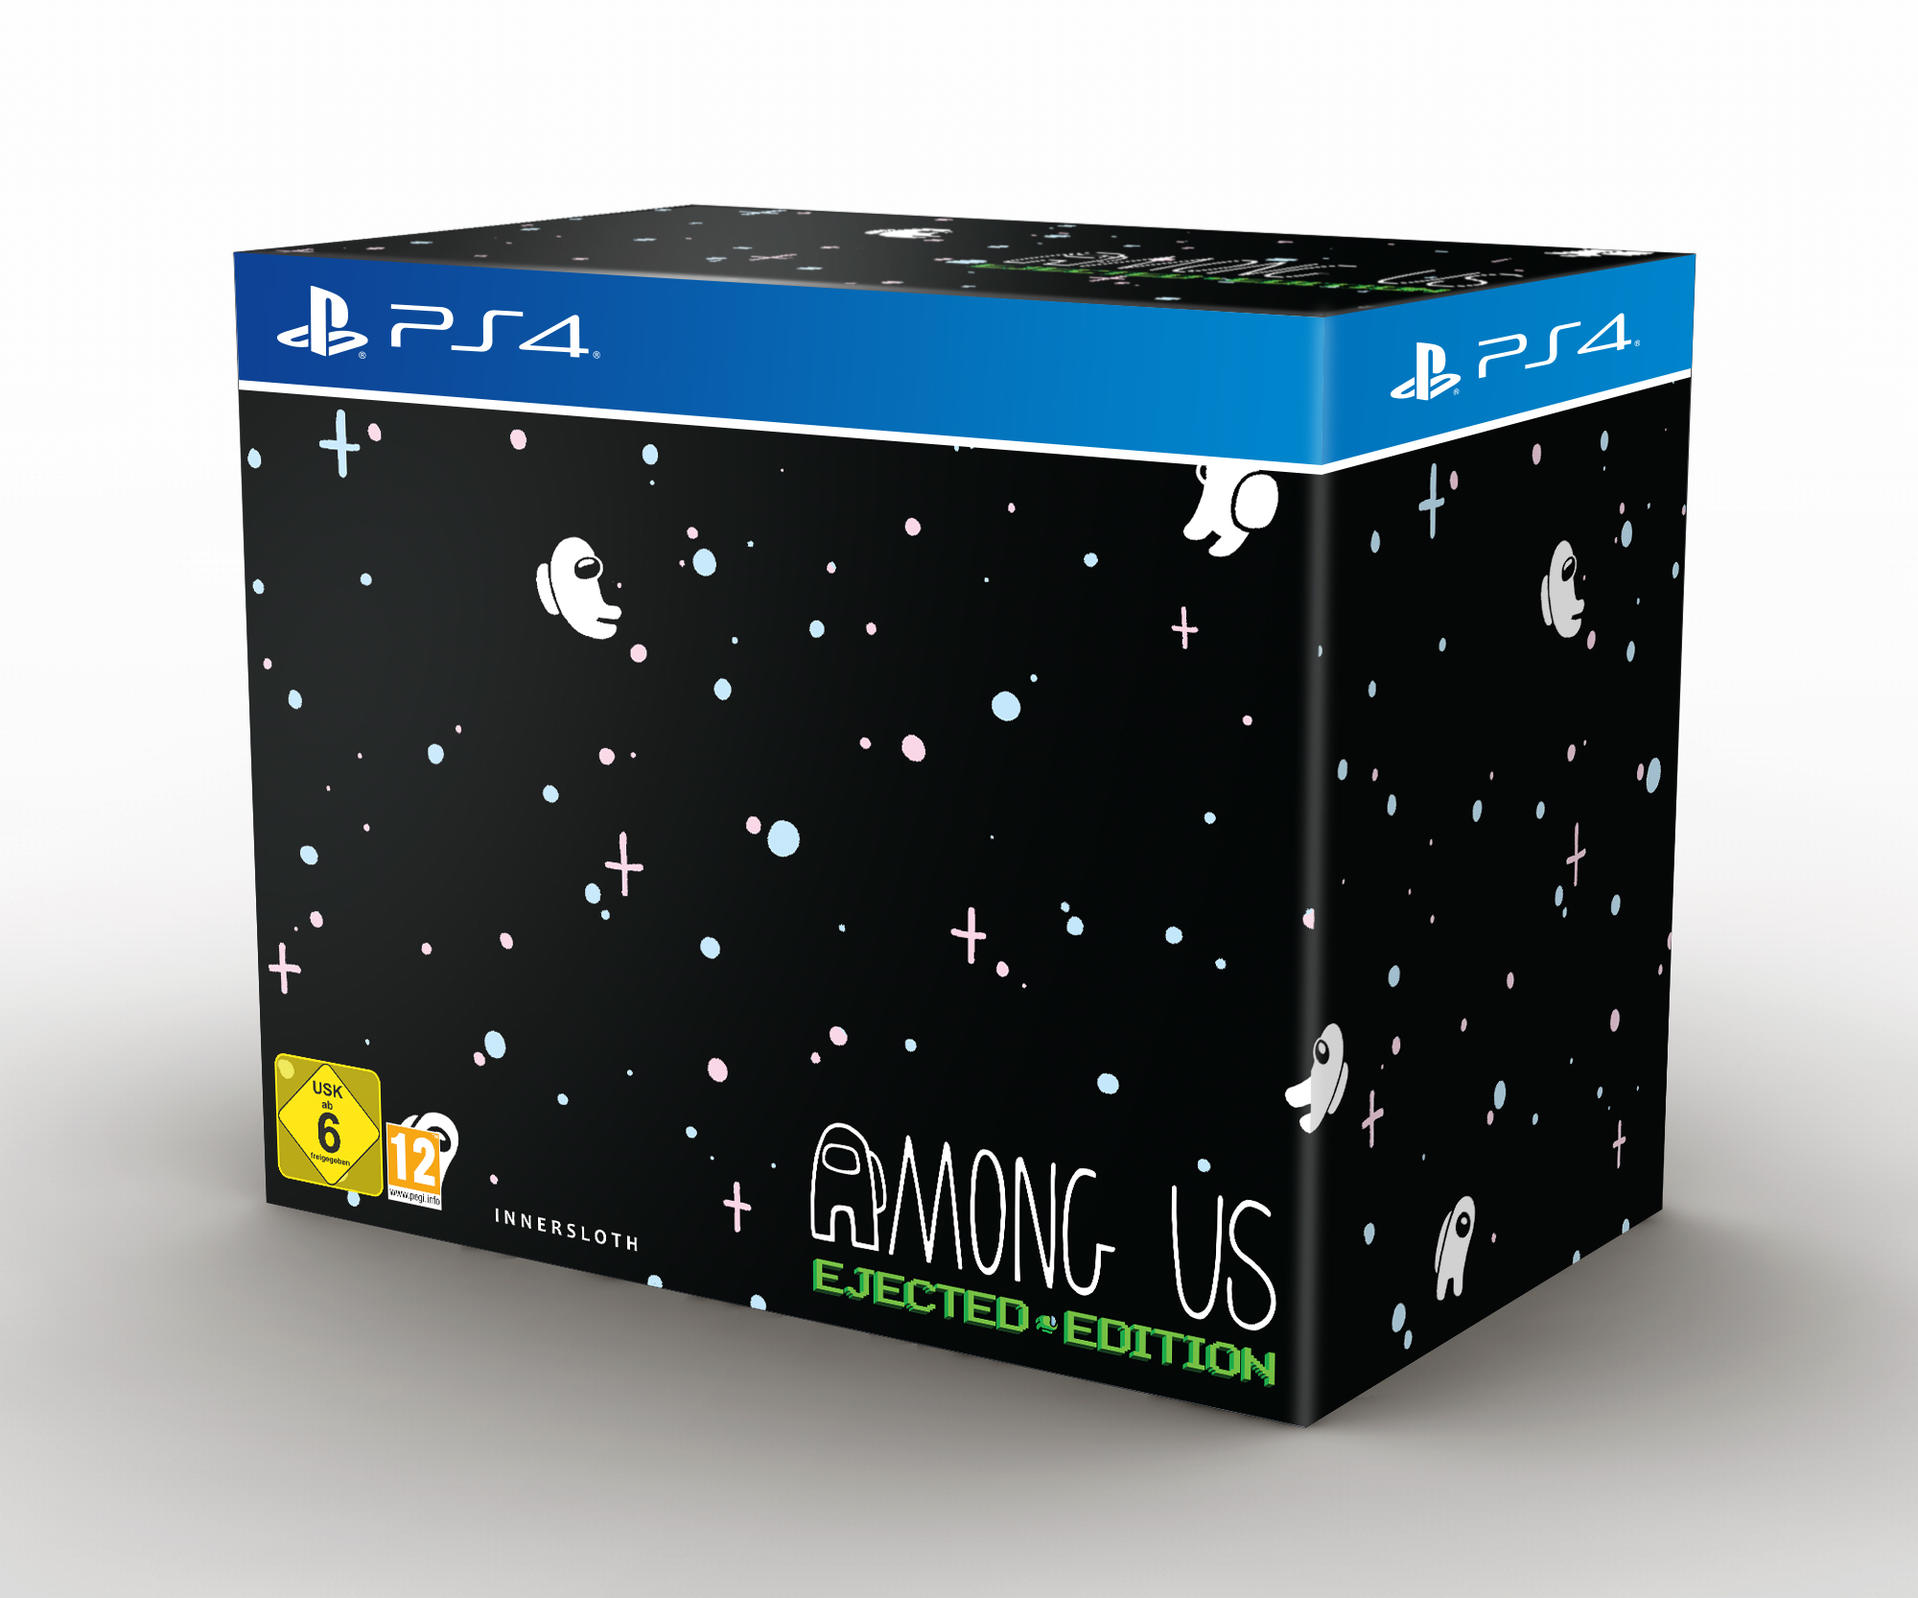 Edition - Among Us: [PlayStation 4] Ejected